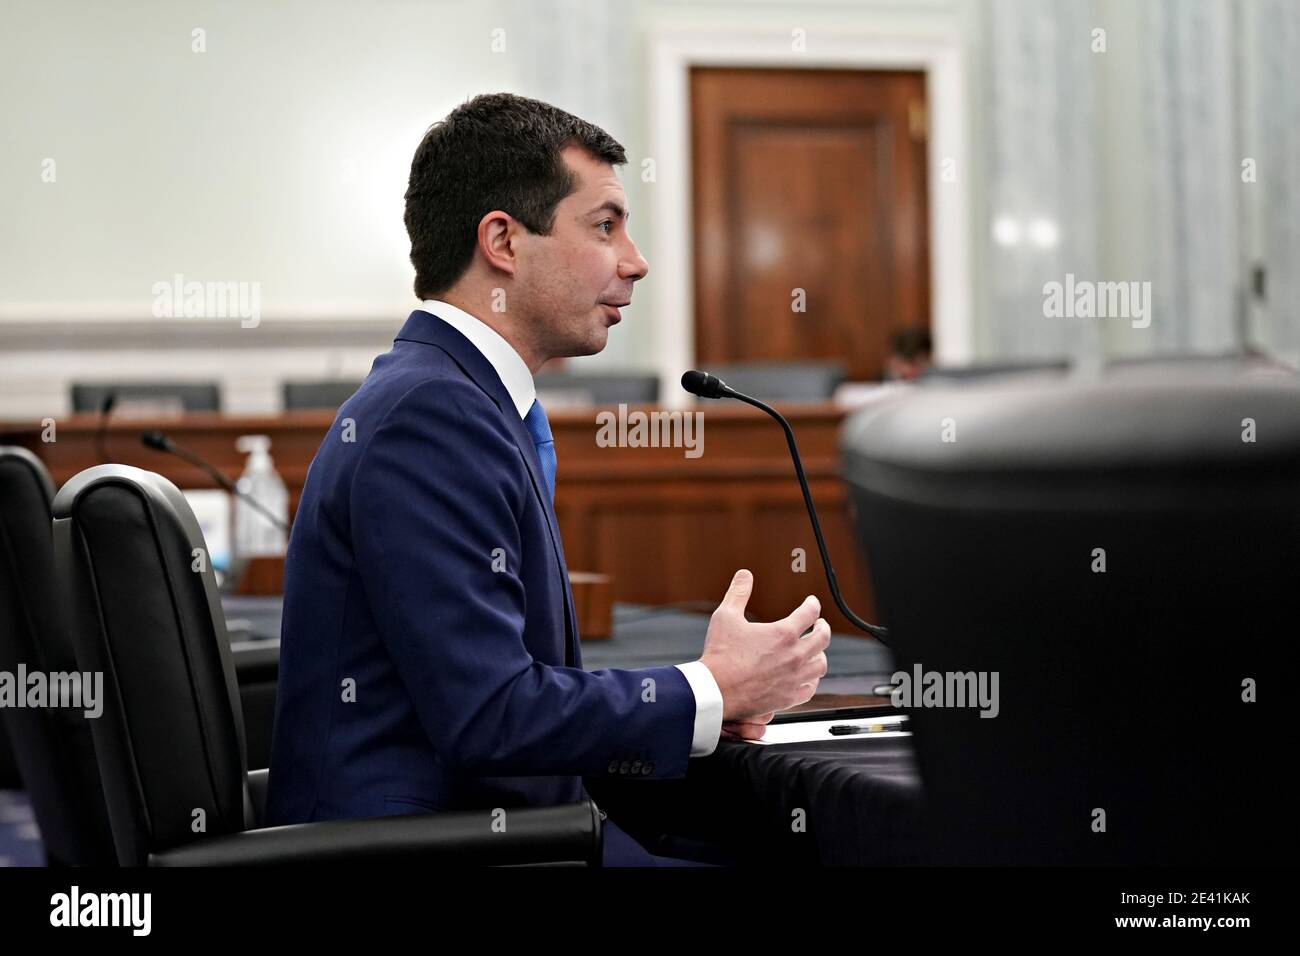 Washington, DC, USA. 21st Jan, 2021. Pete Buttigieg, U.S. secretary of transportation nominee for U.S. President Joe Biden, speaks during a Senate Commerce, Science and Transportation Committee confirmation hearing in Washington, DC, U.S., on Thursday, Jan. 21, 2021. Buttigieg, is pledging to carry out the administration's ambitious agenda to rebuild the nation's infrastructure, calling it a 'generational opportunity' to create new jobs, fight economic inequality and stem climate change. Credit: Stefani Reynolds/Pool via CNP | usage worldwide Credit: dpa/Alamy Live News Stock Photo